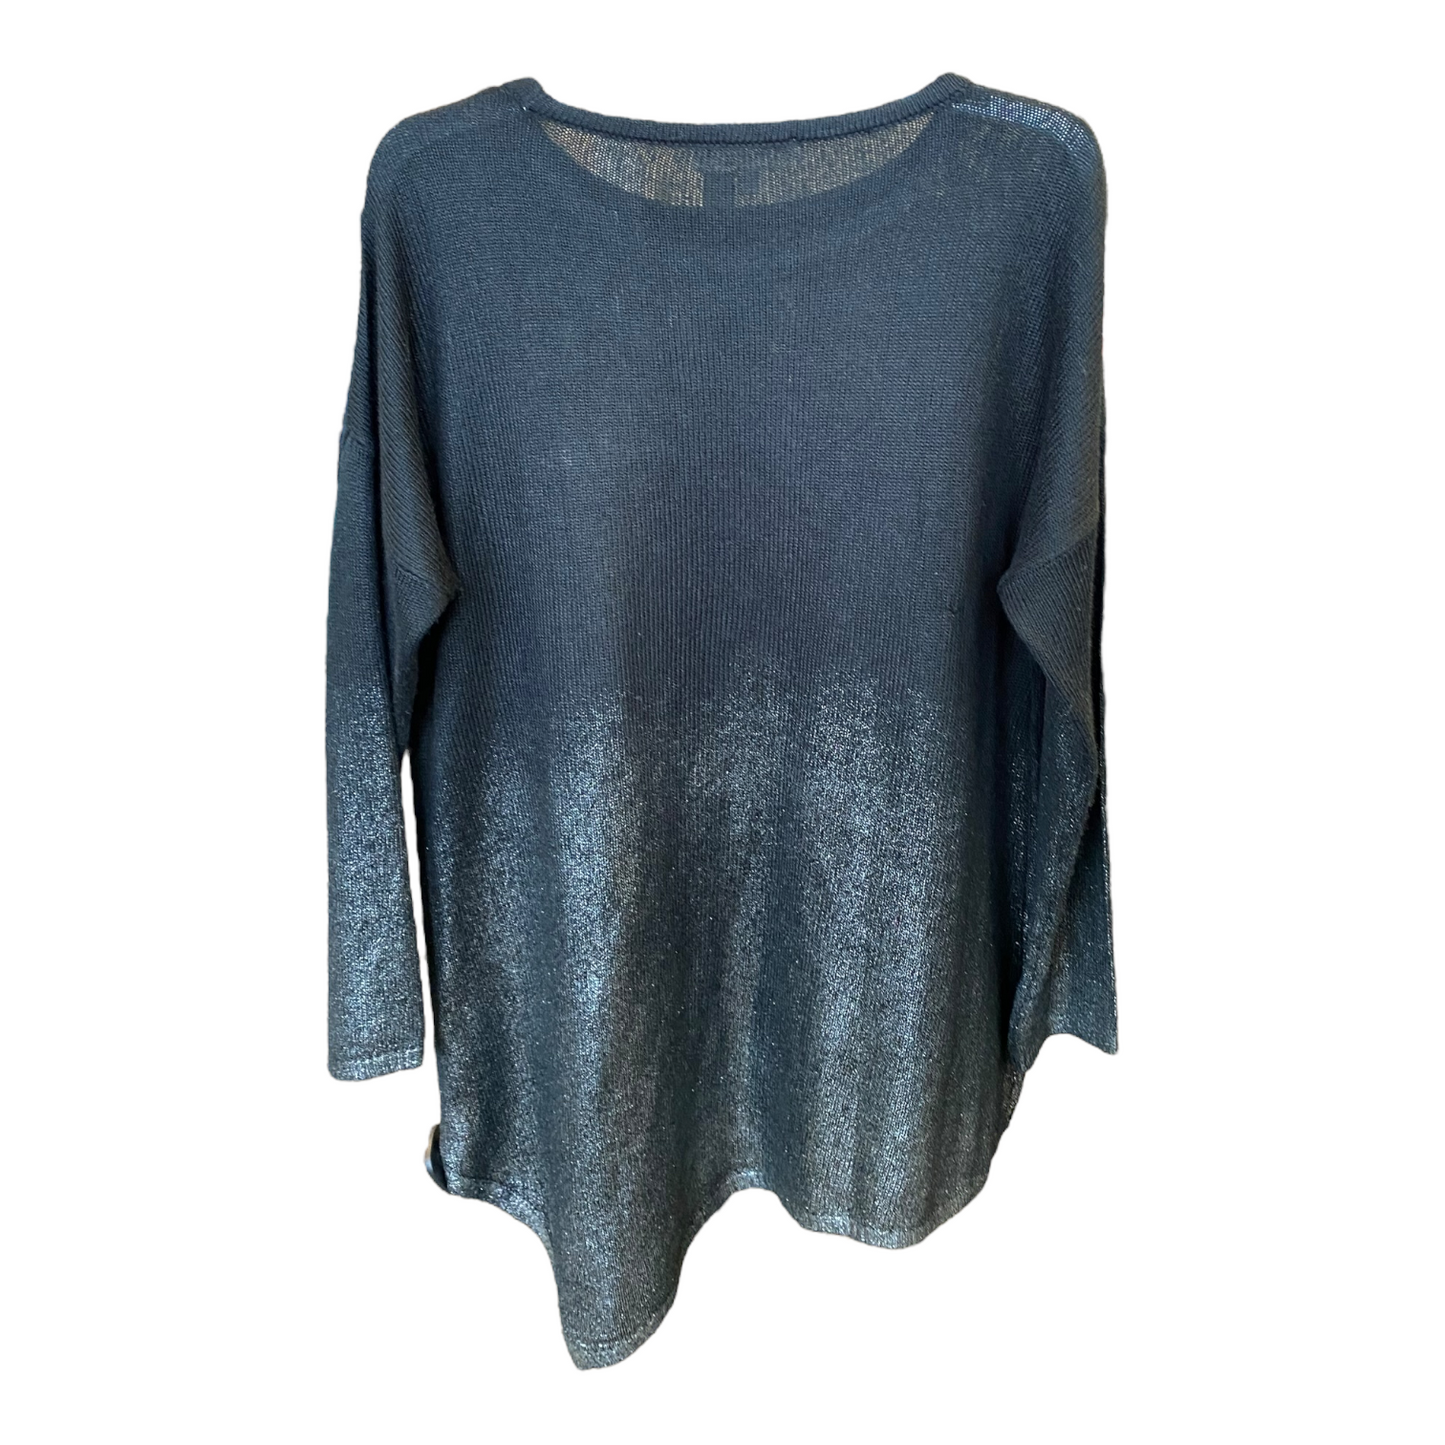 Sweater By Vince Camuto  Size: 1x